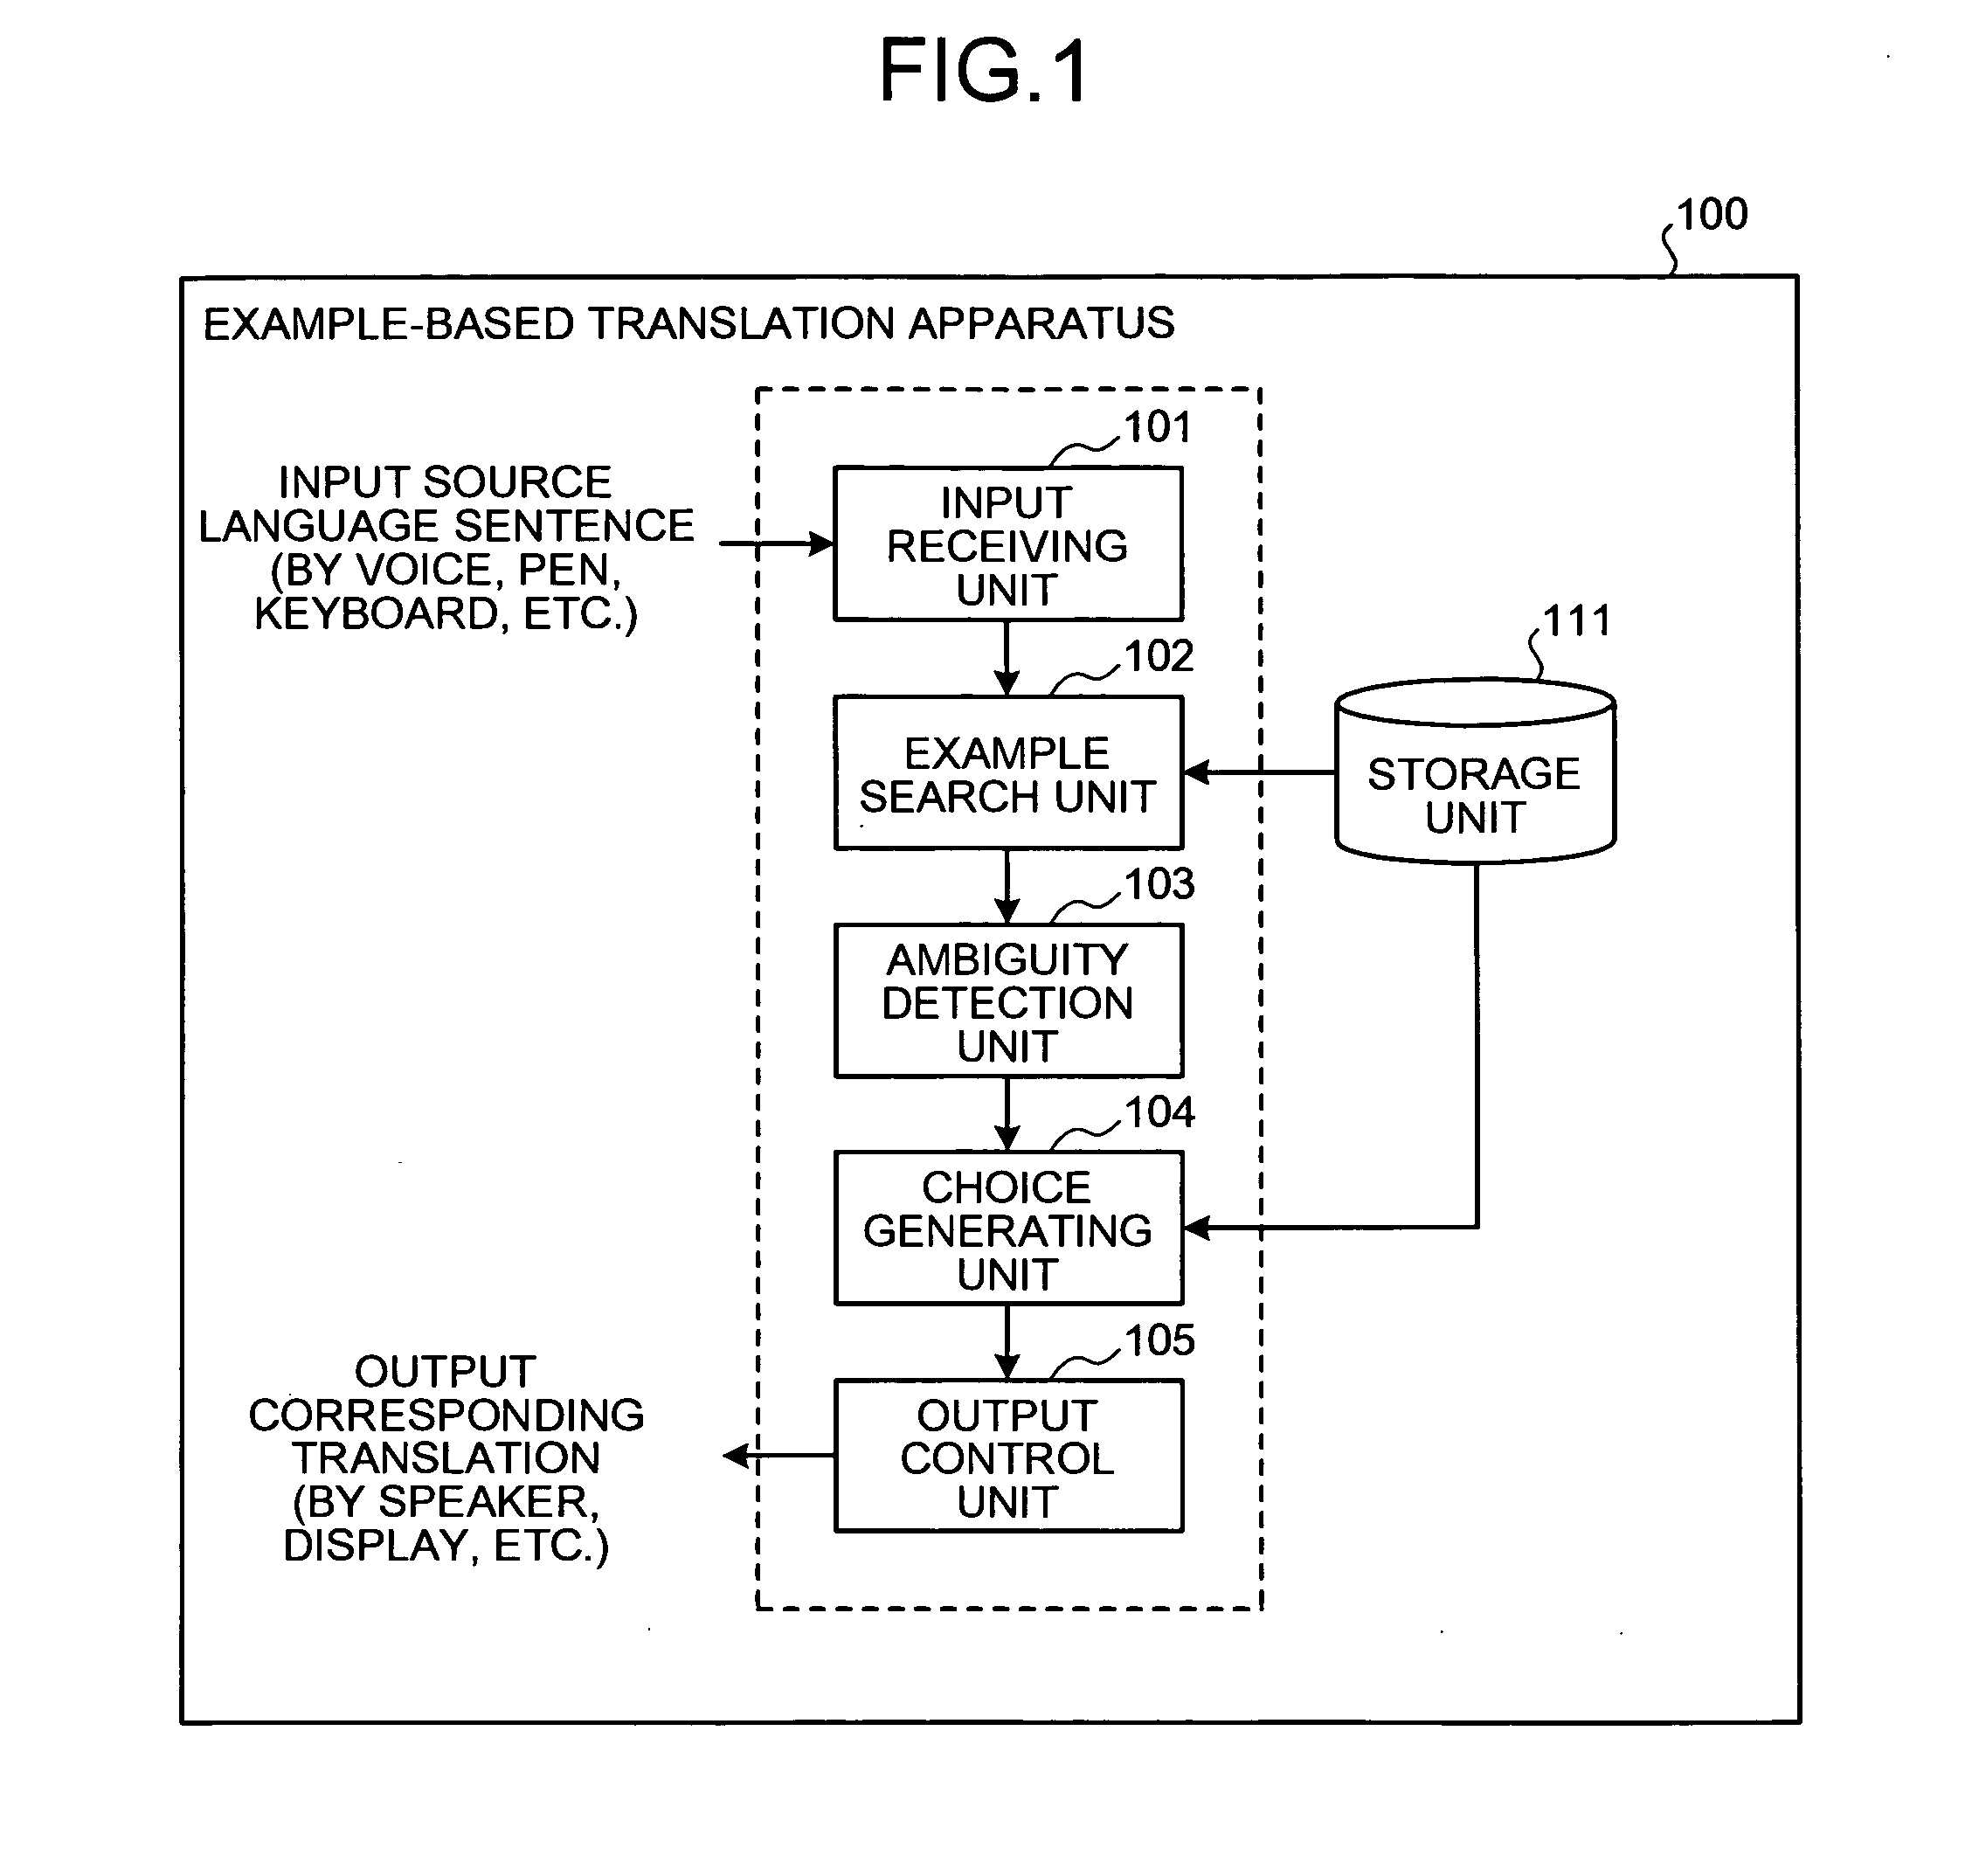 Apparatus, method and computer program product for translating speech input using example